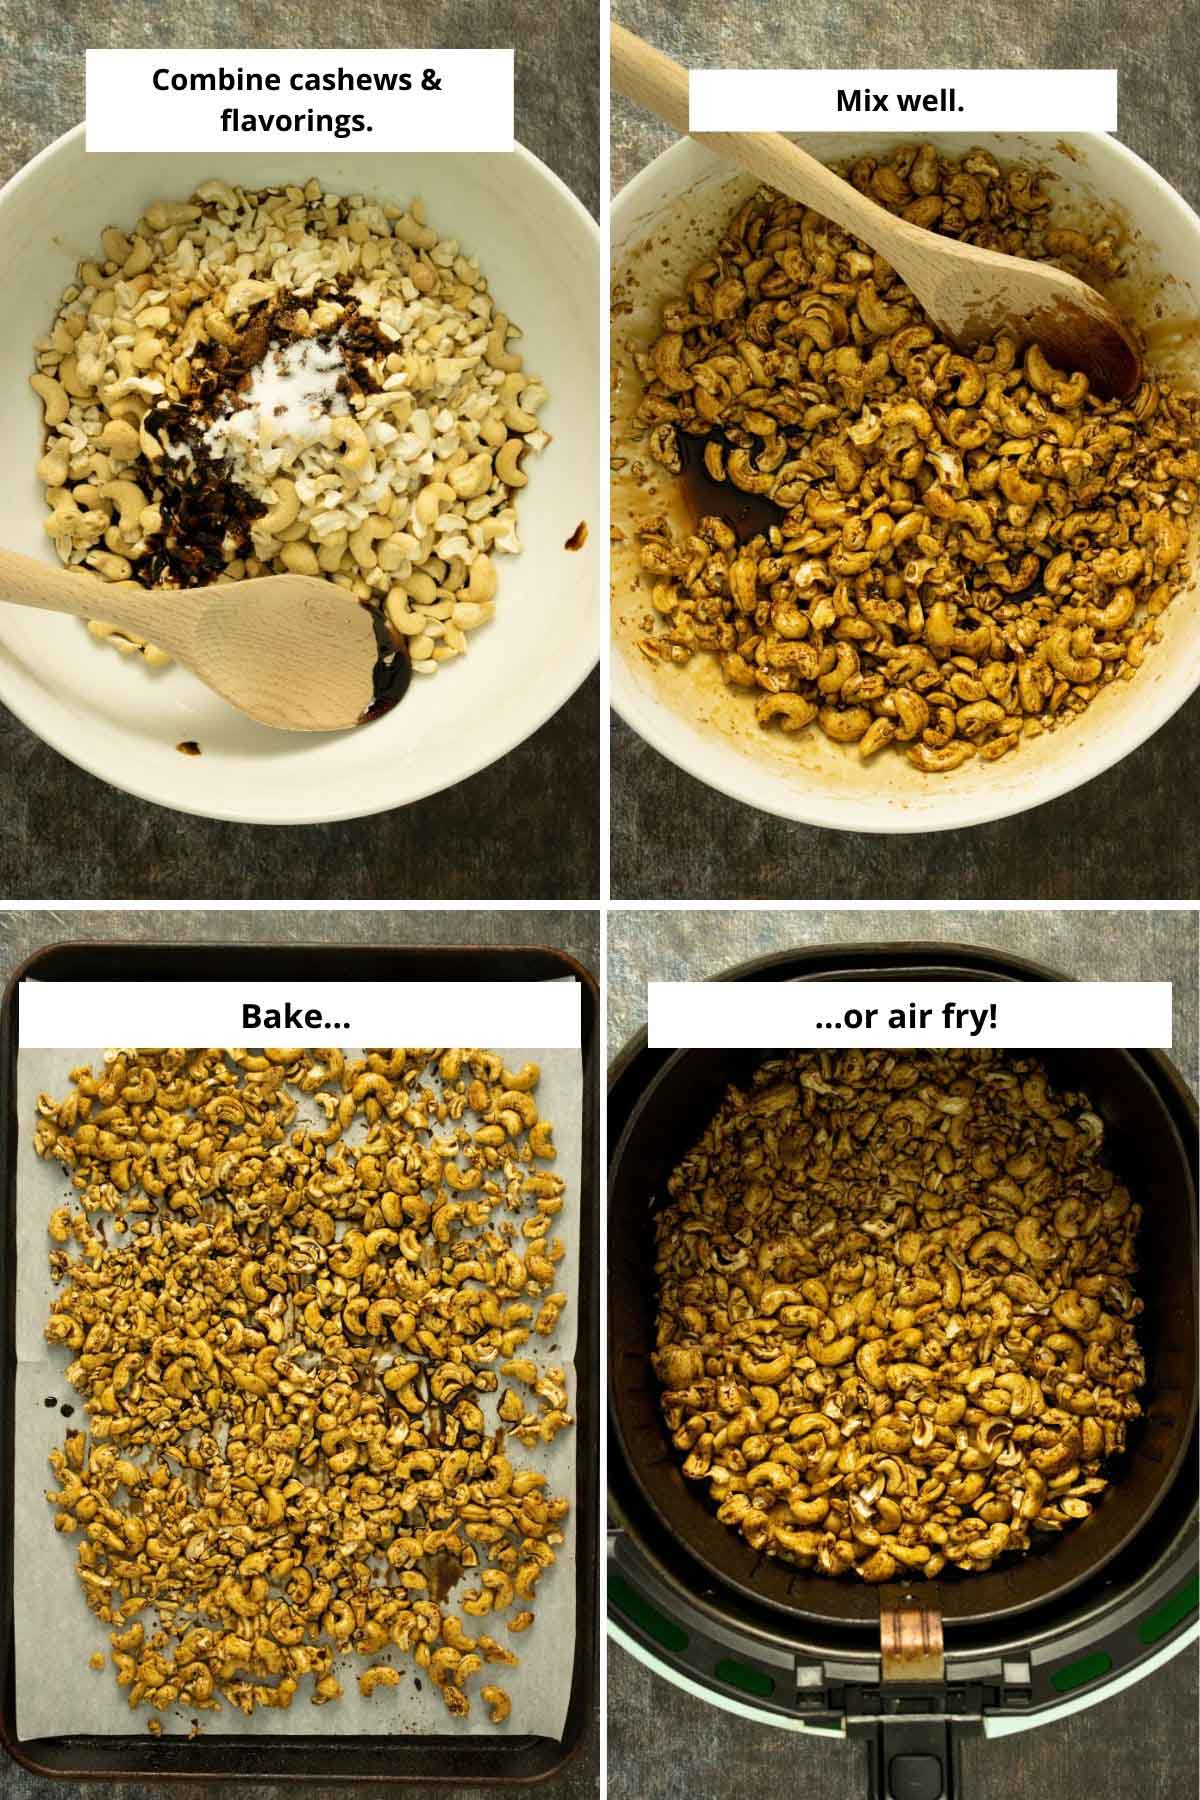 image collage showing the cashews before and after mixing the flavoring, then on a baking sheet and in an air fryer basket